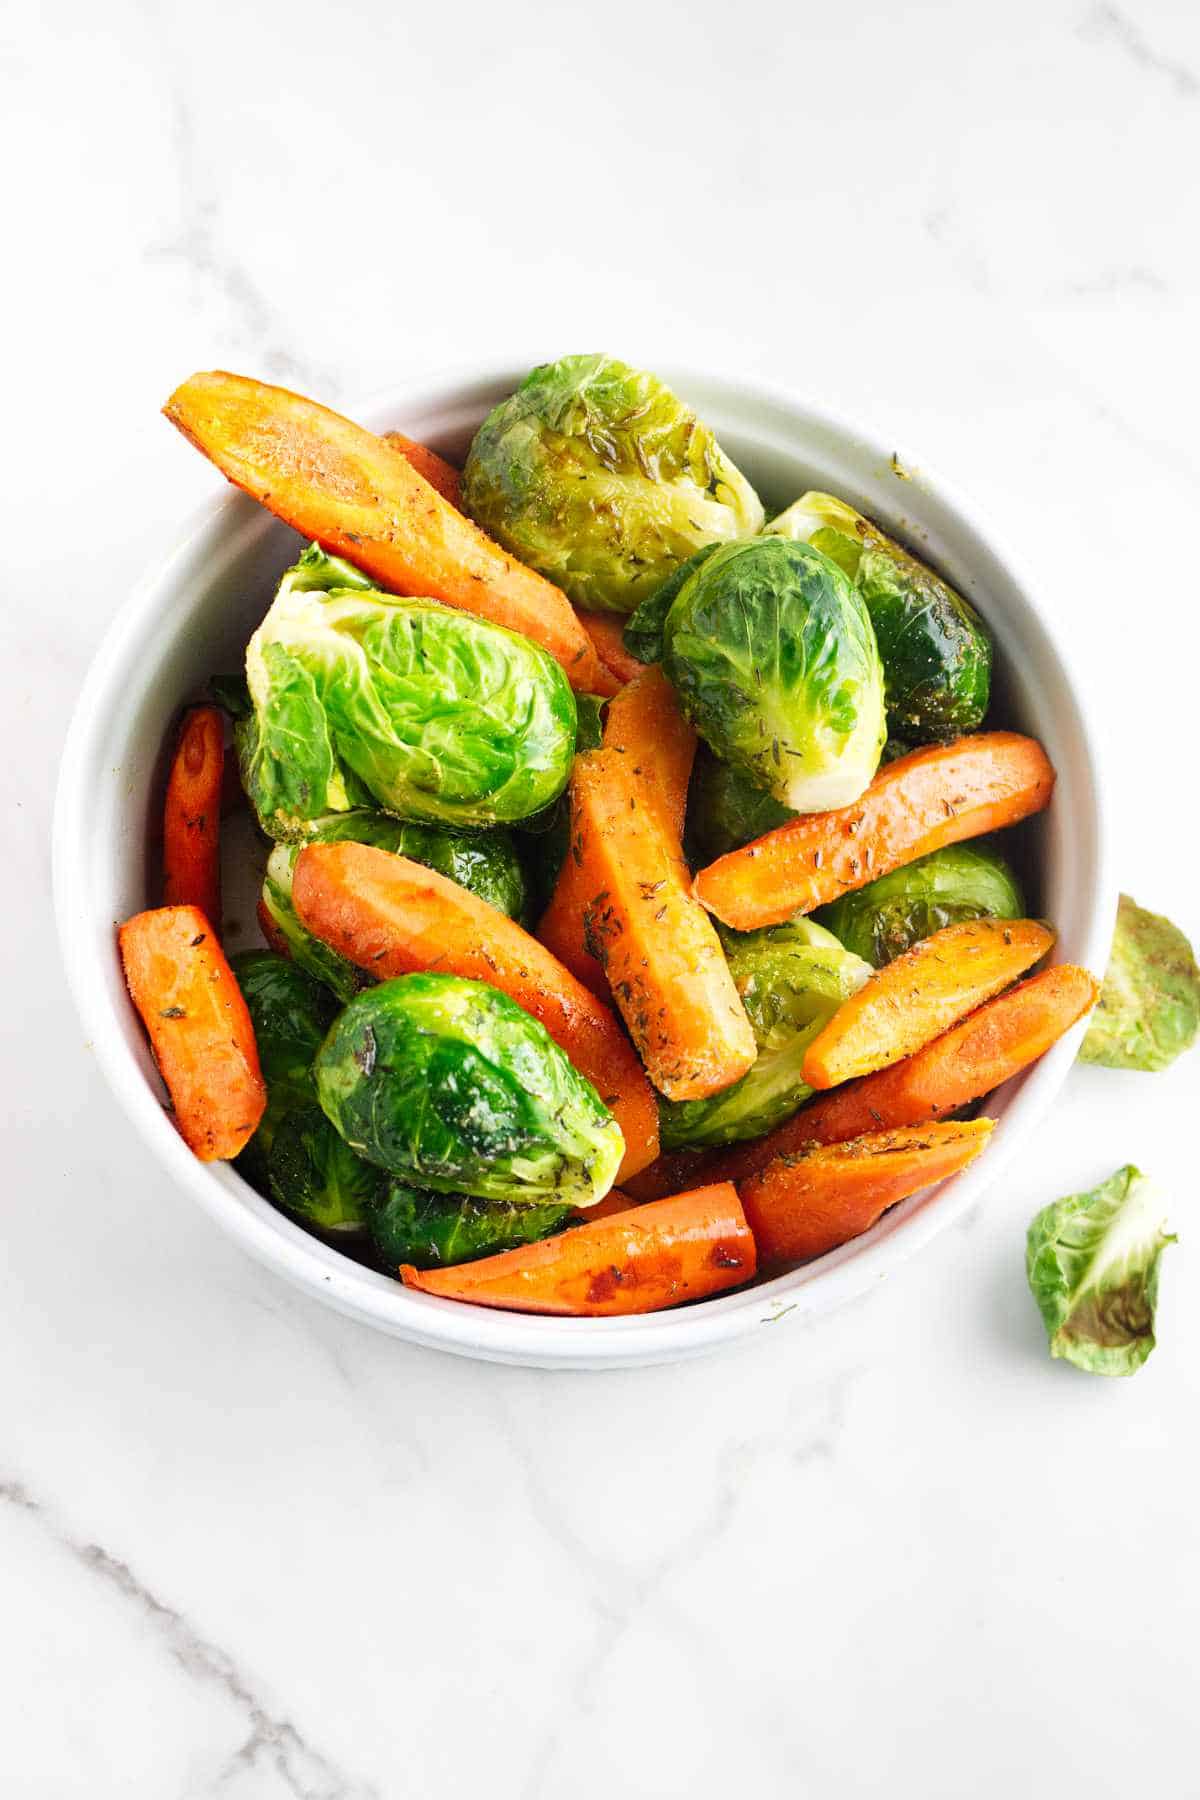 Serving bowl of roasted carrots and brussels sprouts.